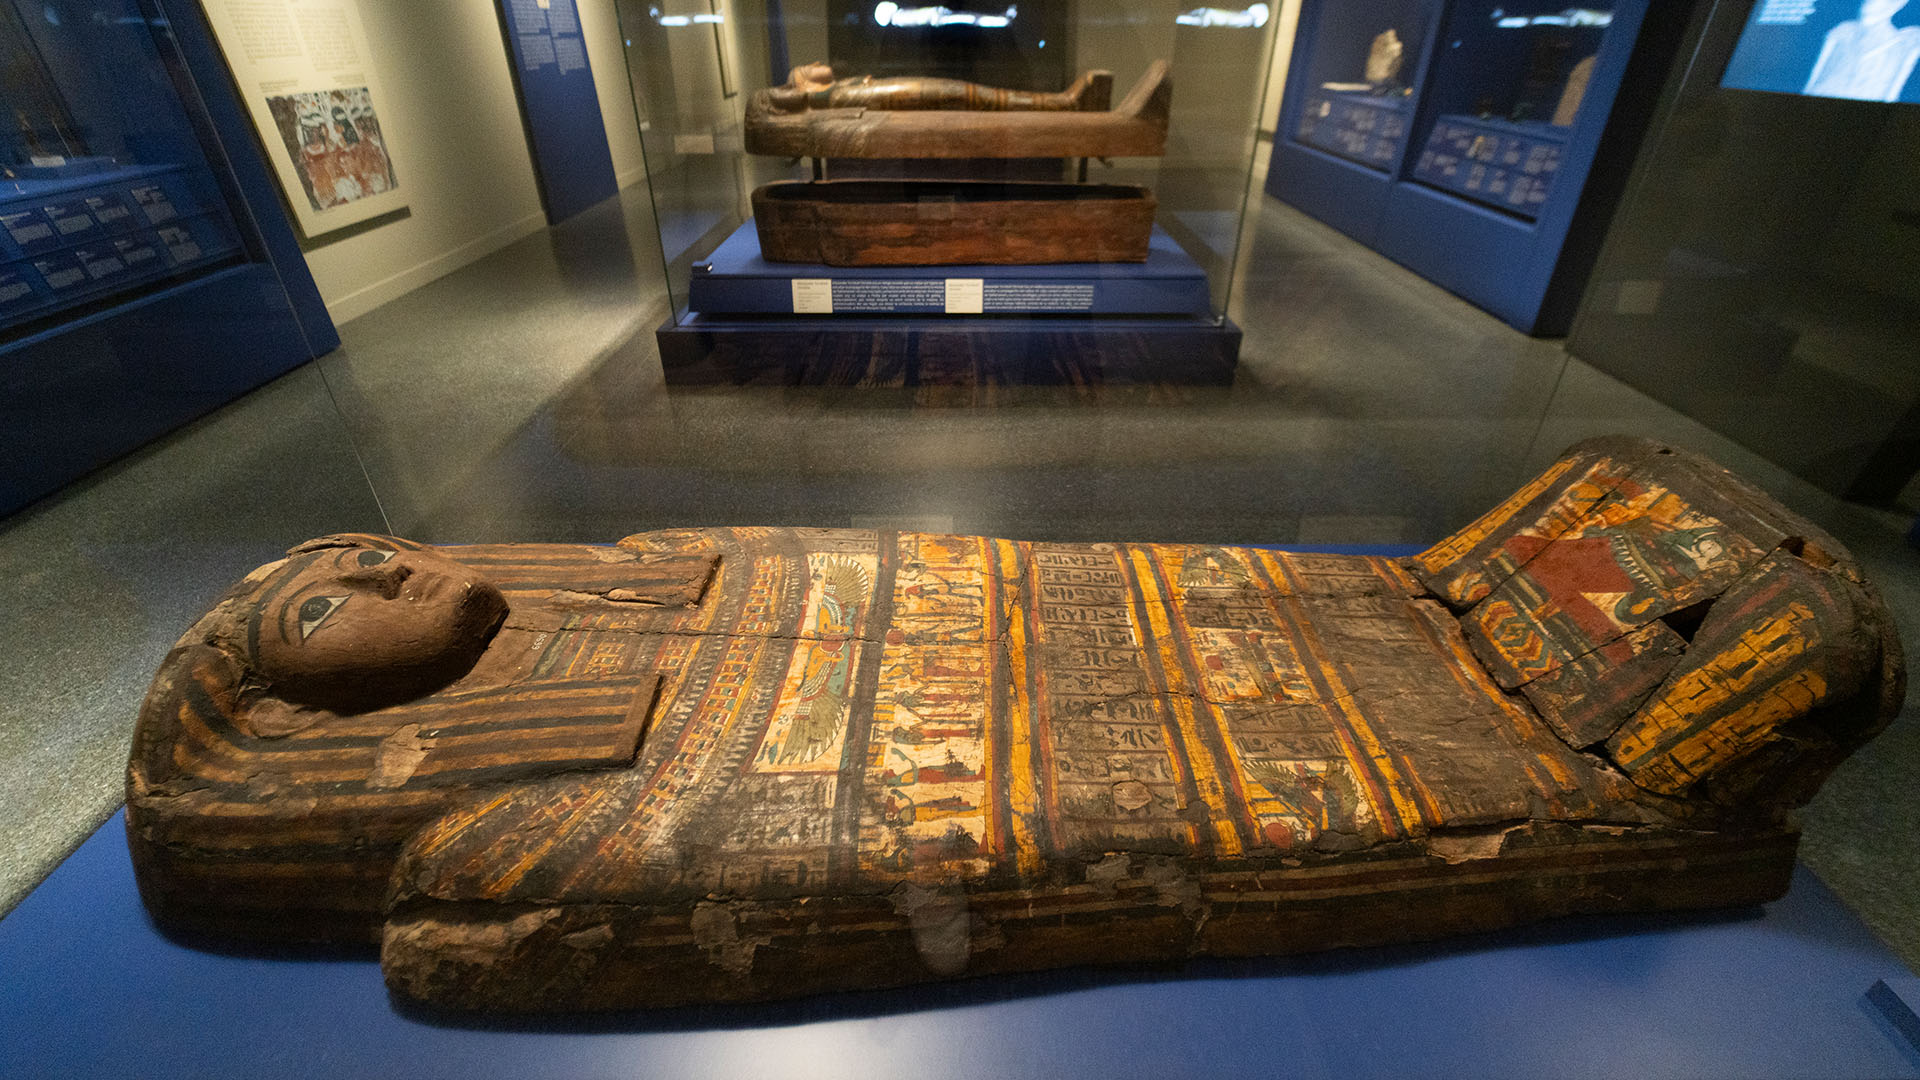 Sarcophagi on display during the exhibition 'Mummies of Egypt: Rediscovering Six Lives'.